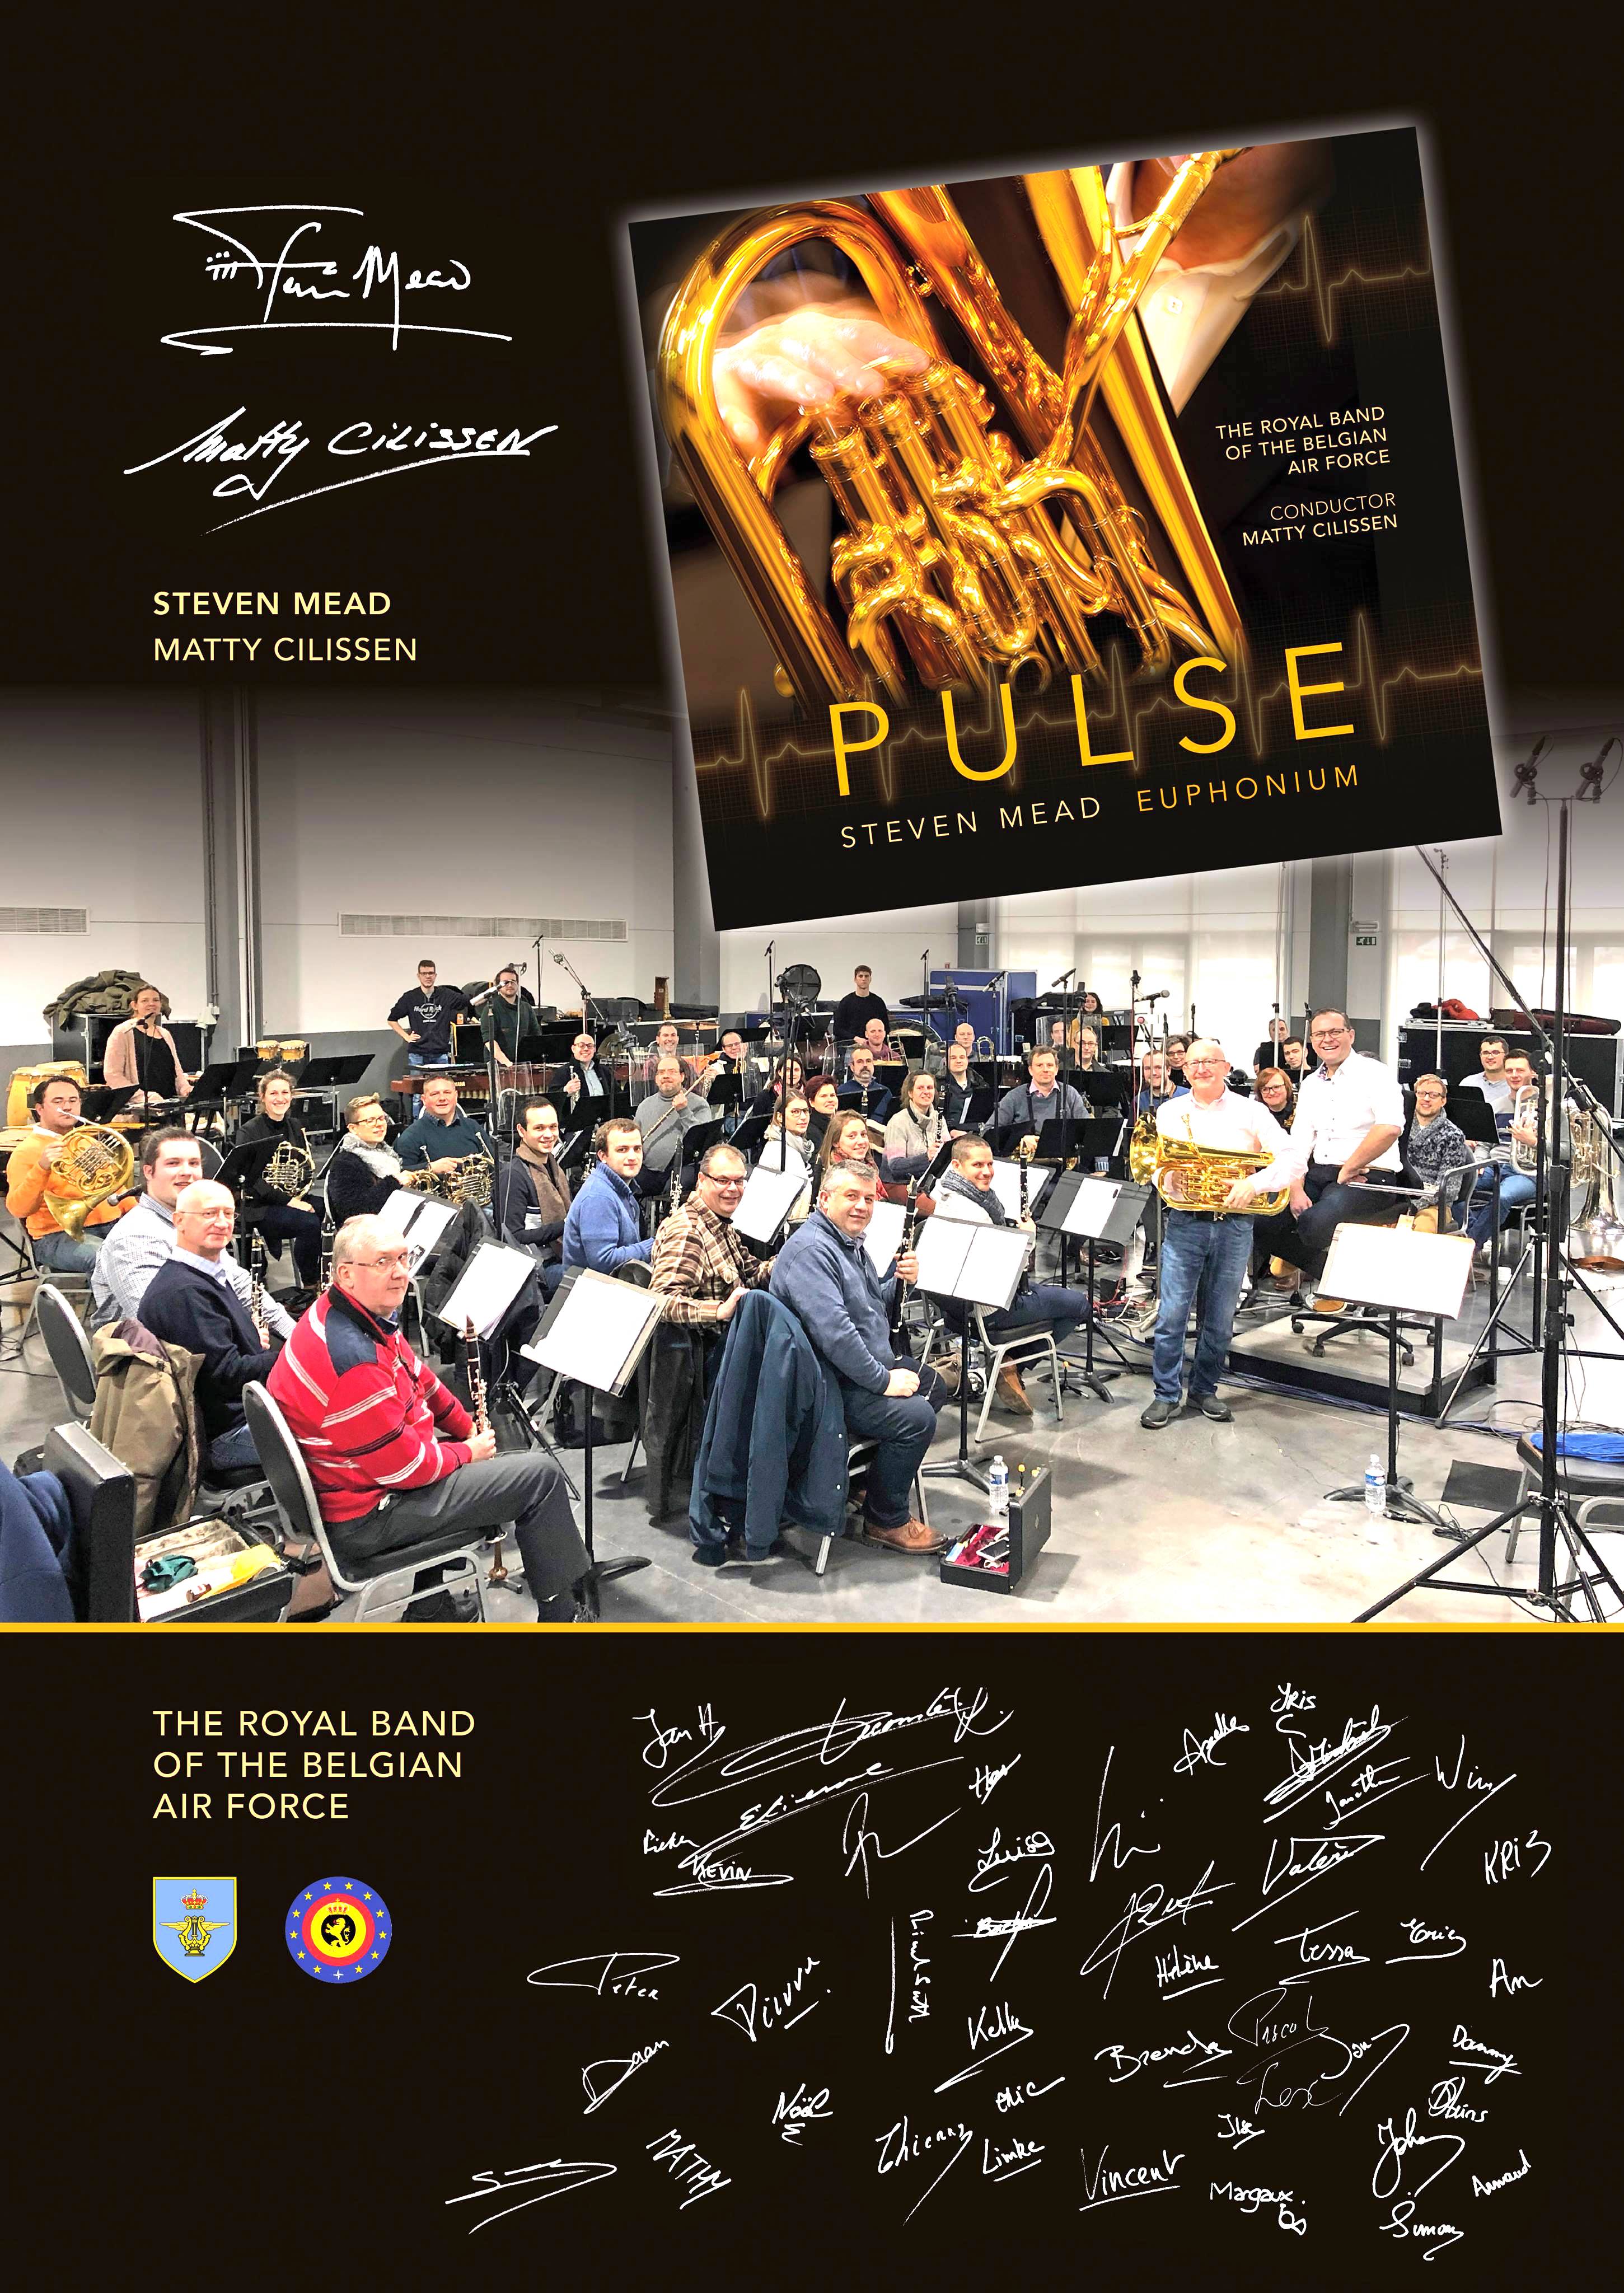 Signed souvenir poster for the Pulse CD